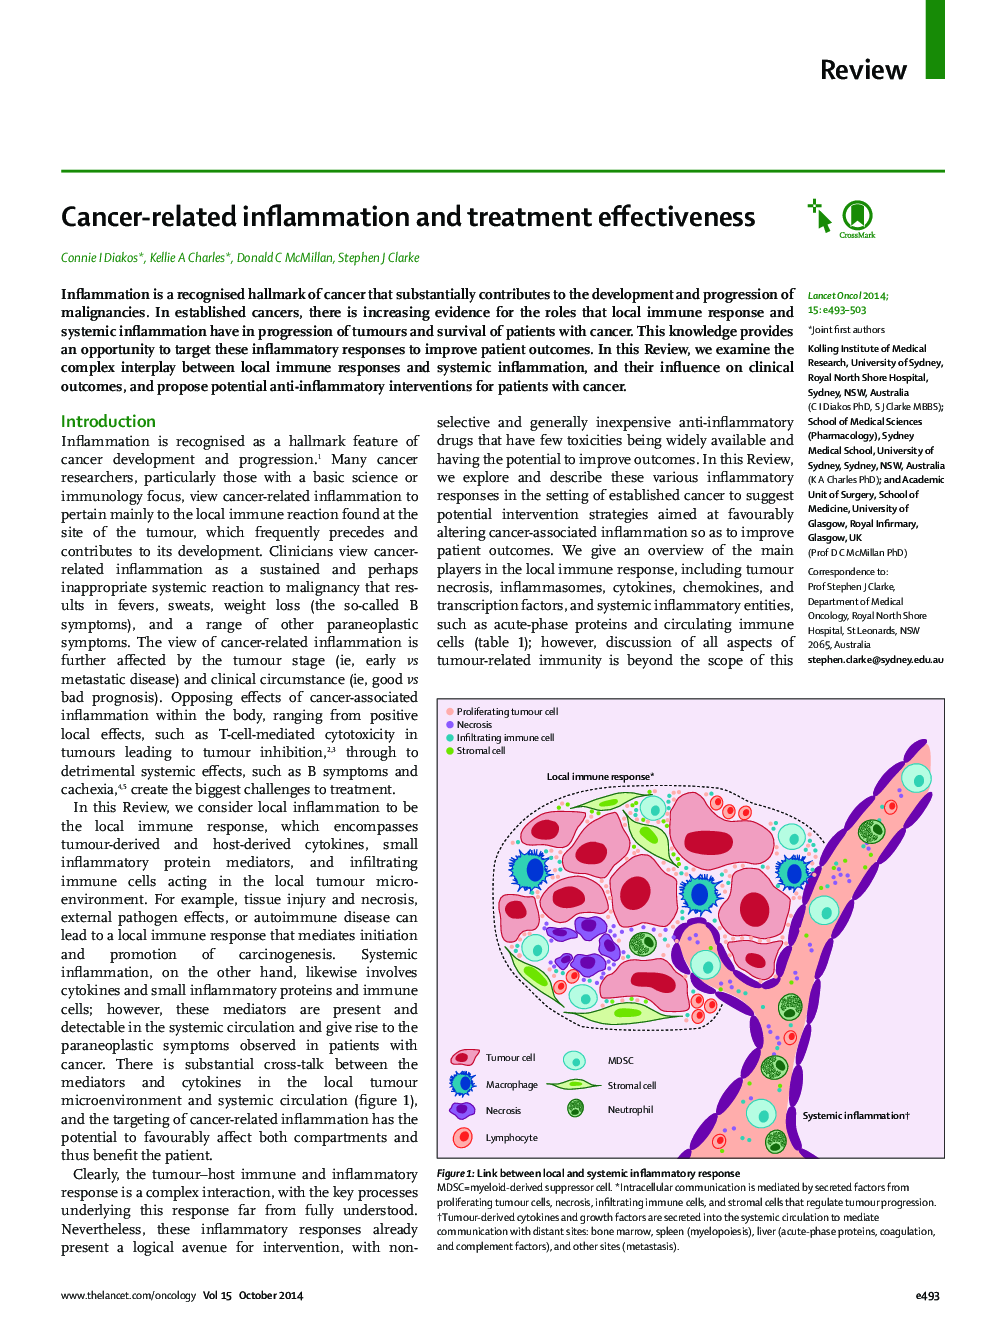 Cancer-related inflammation and treatment effectiveness